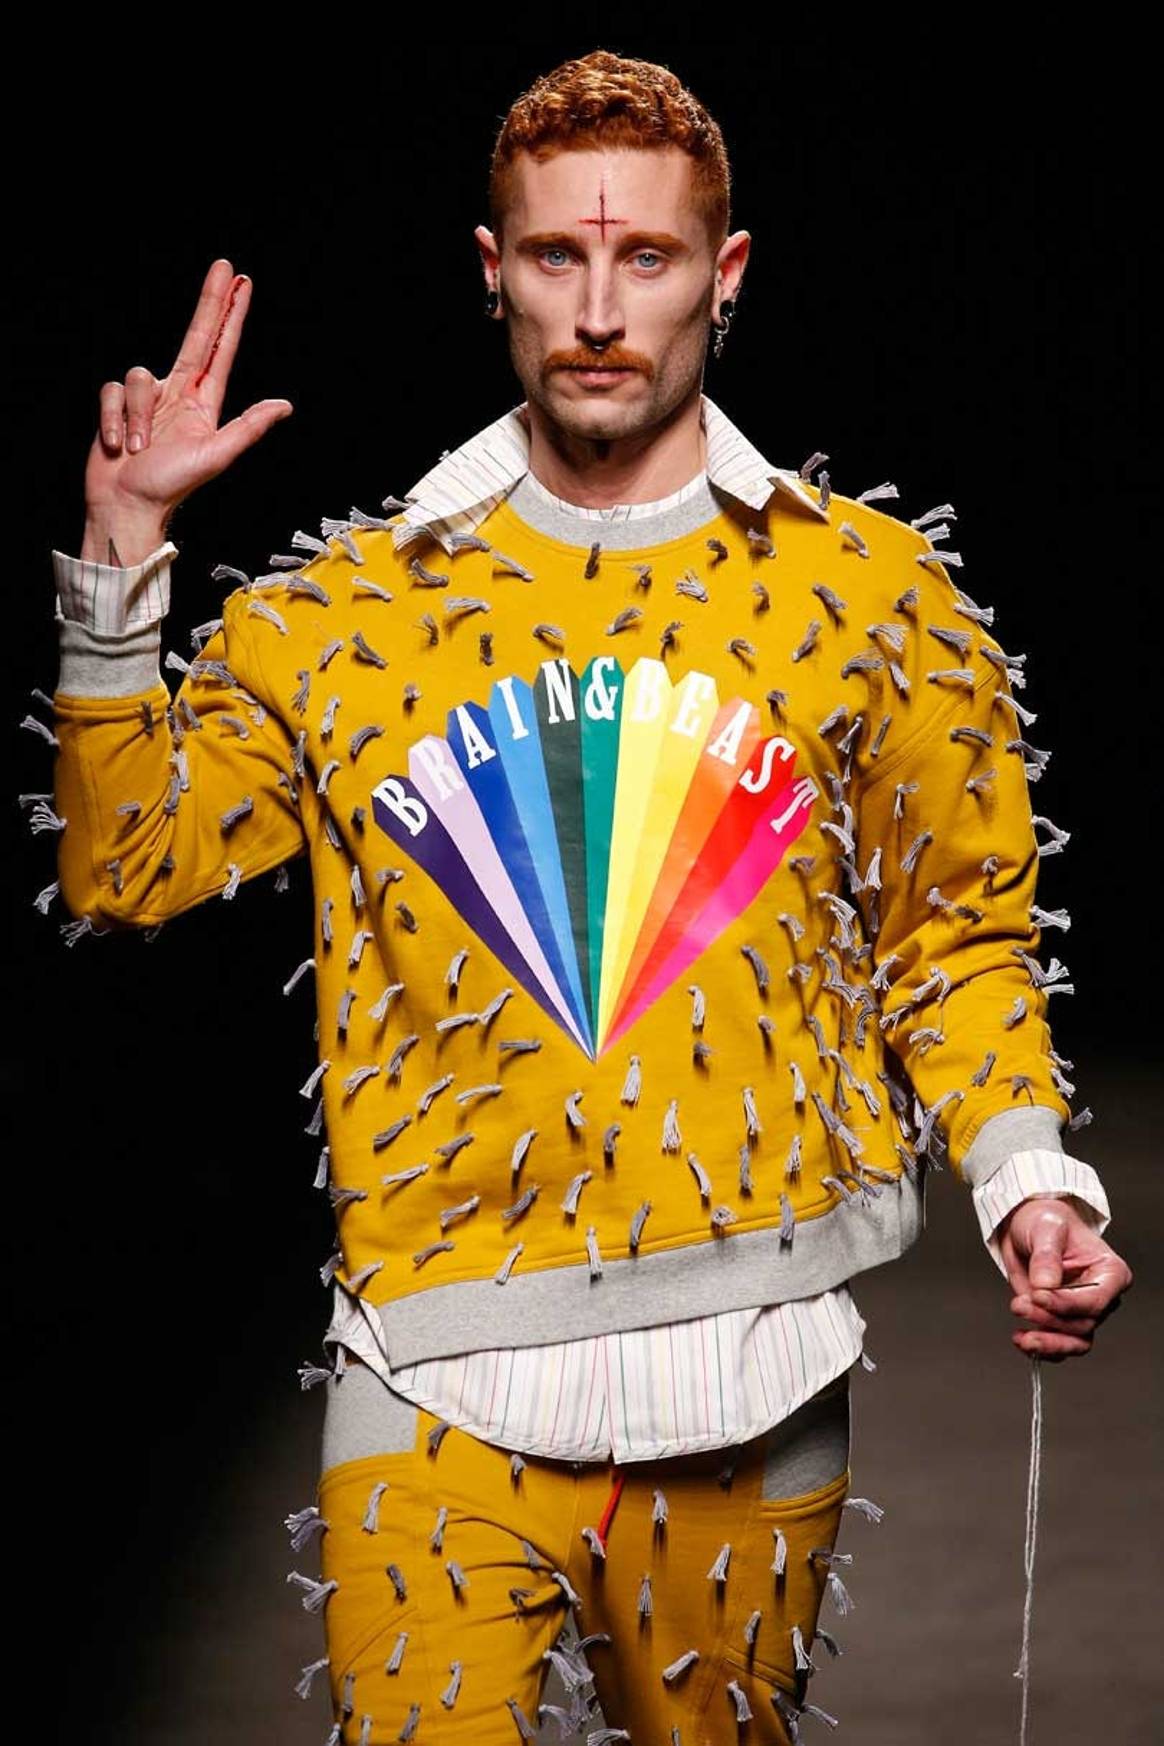 In pictures: highlighting young designers at MBFWMadrid AW19